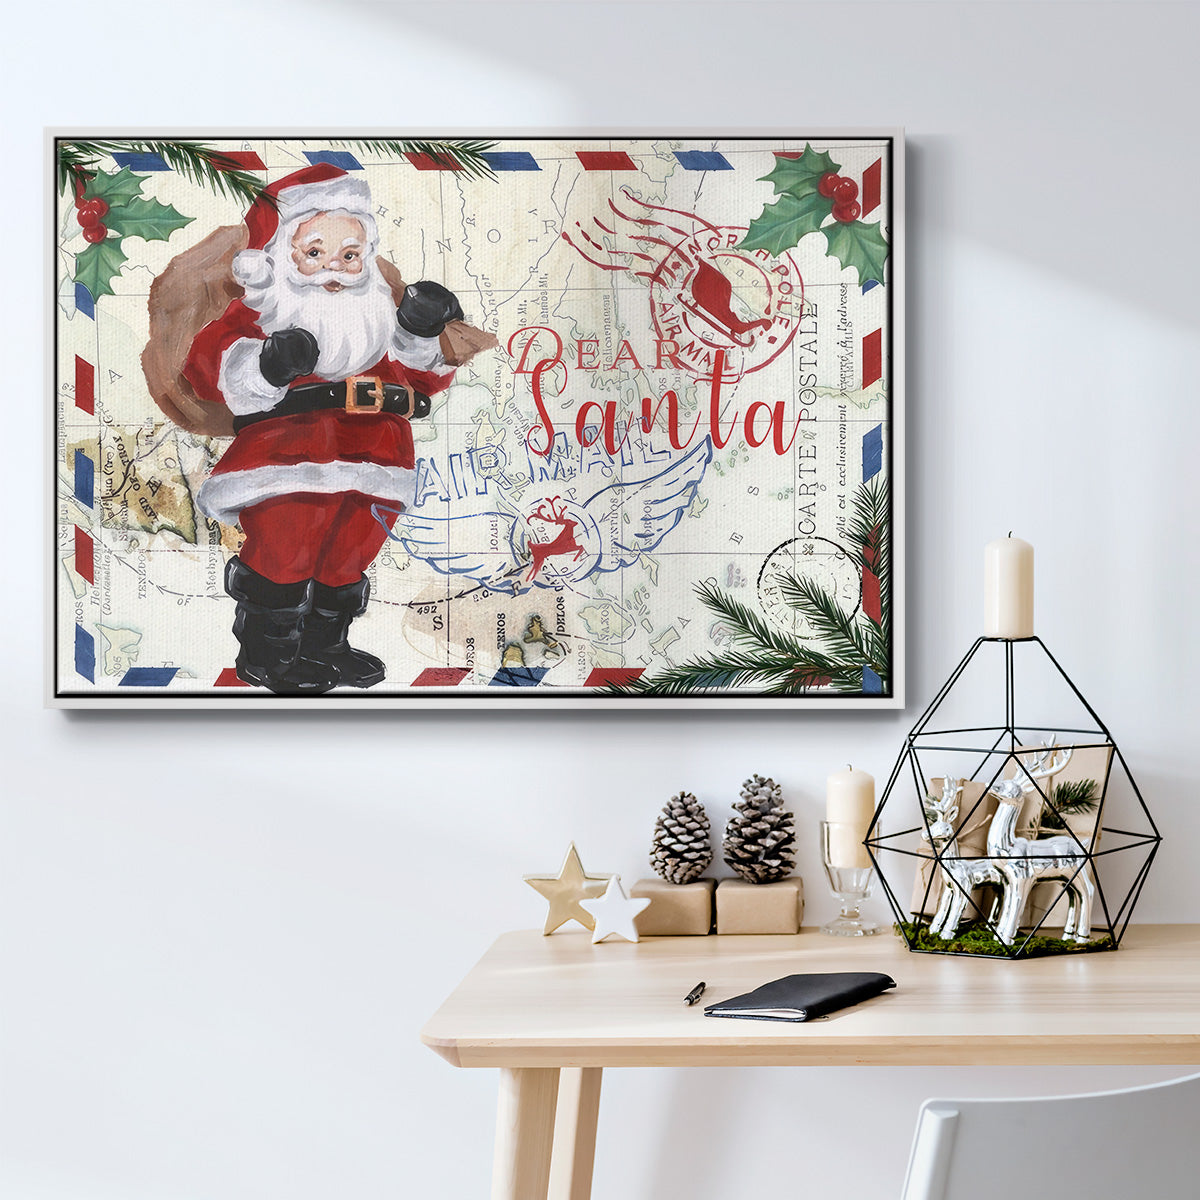 Christmas Par Avion Collection A - Framed Gallery Wrapped Canvas in Floating Frame